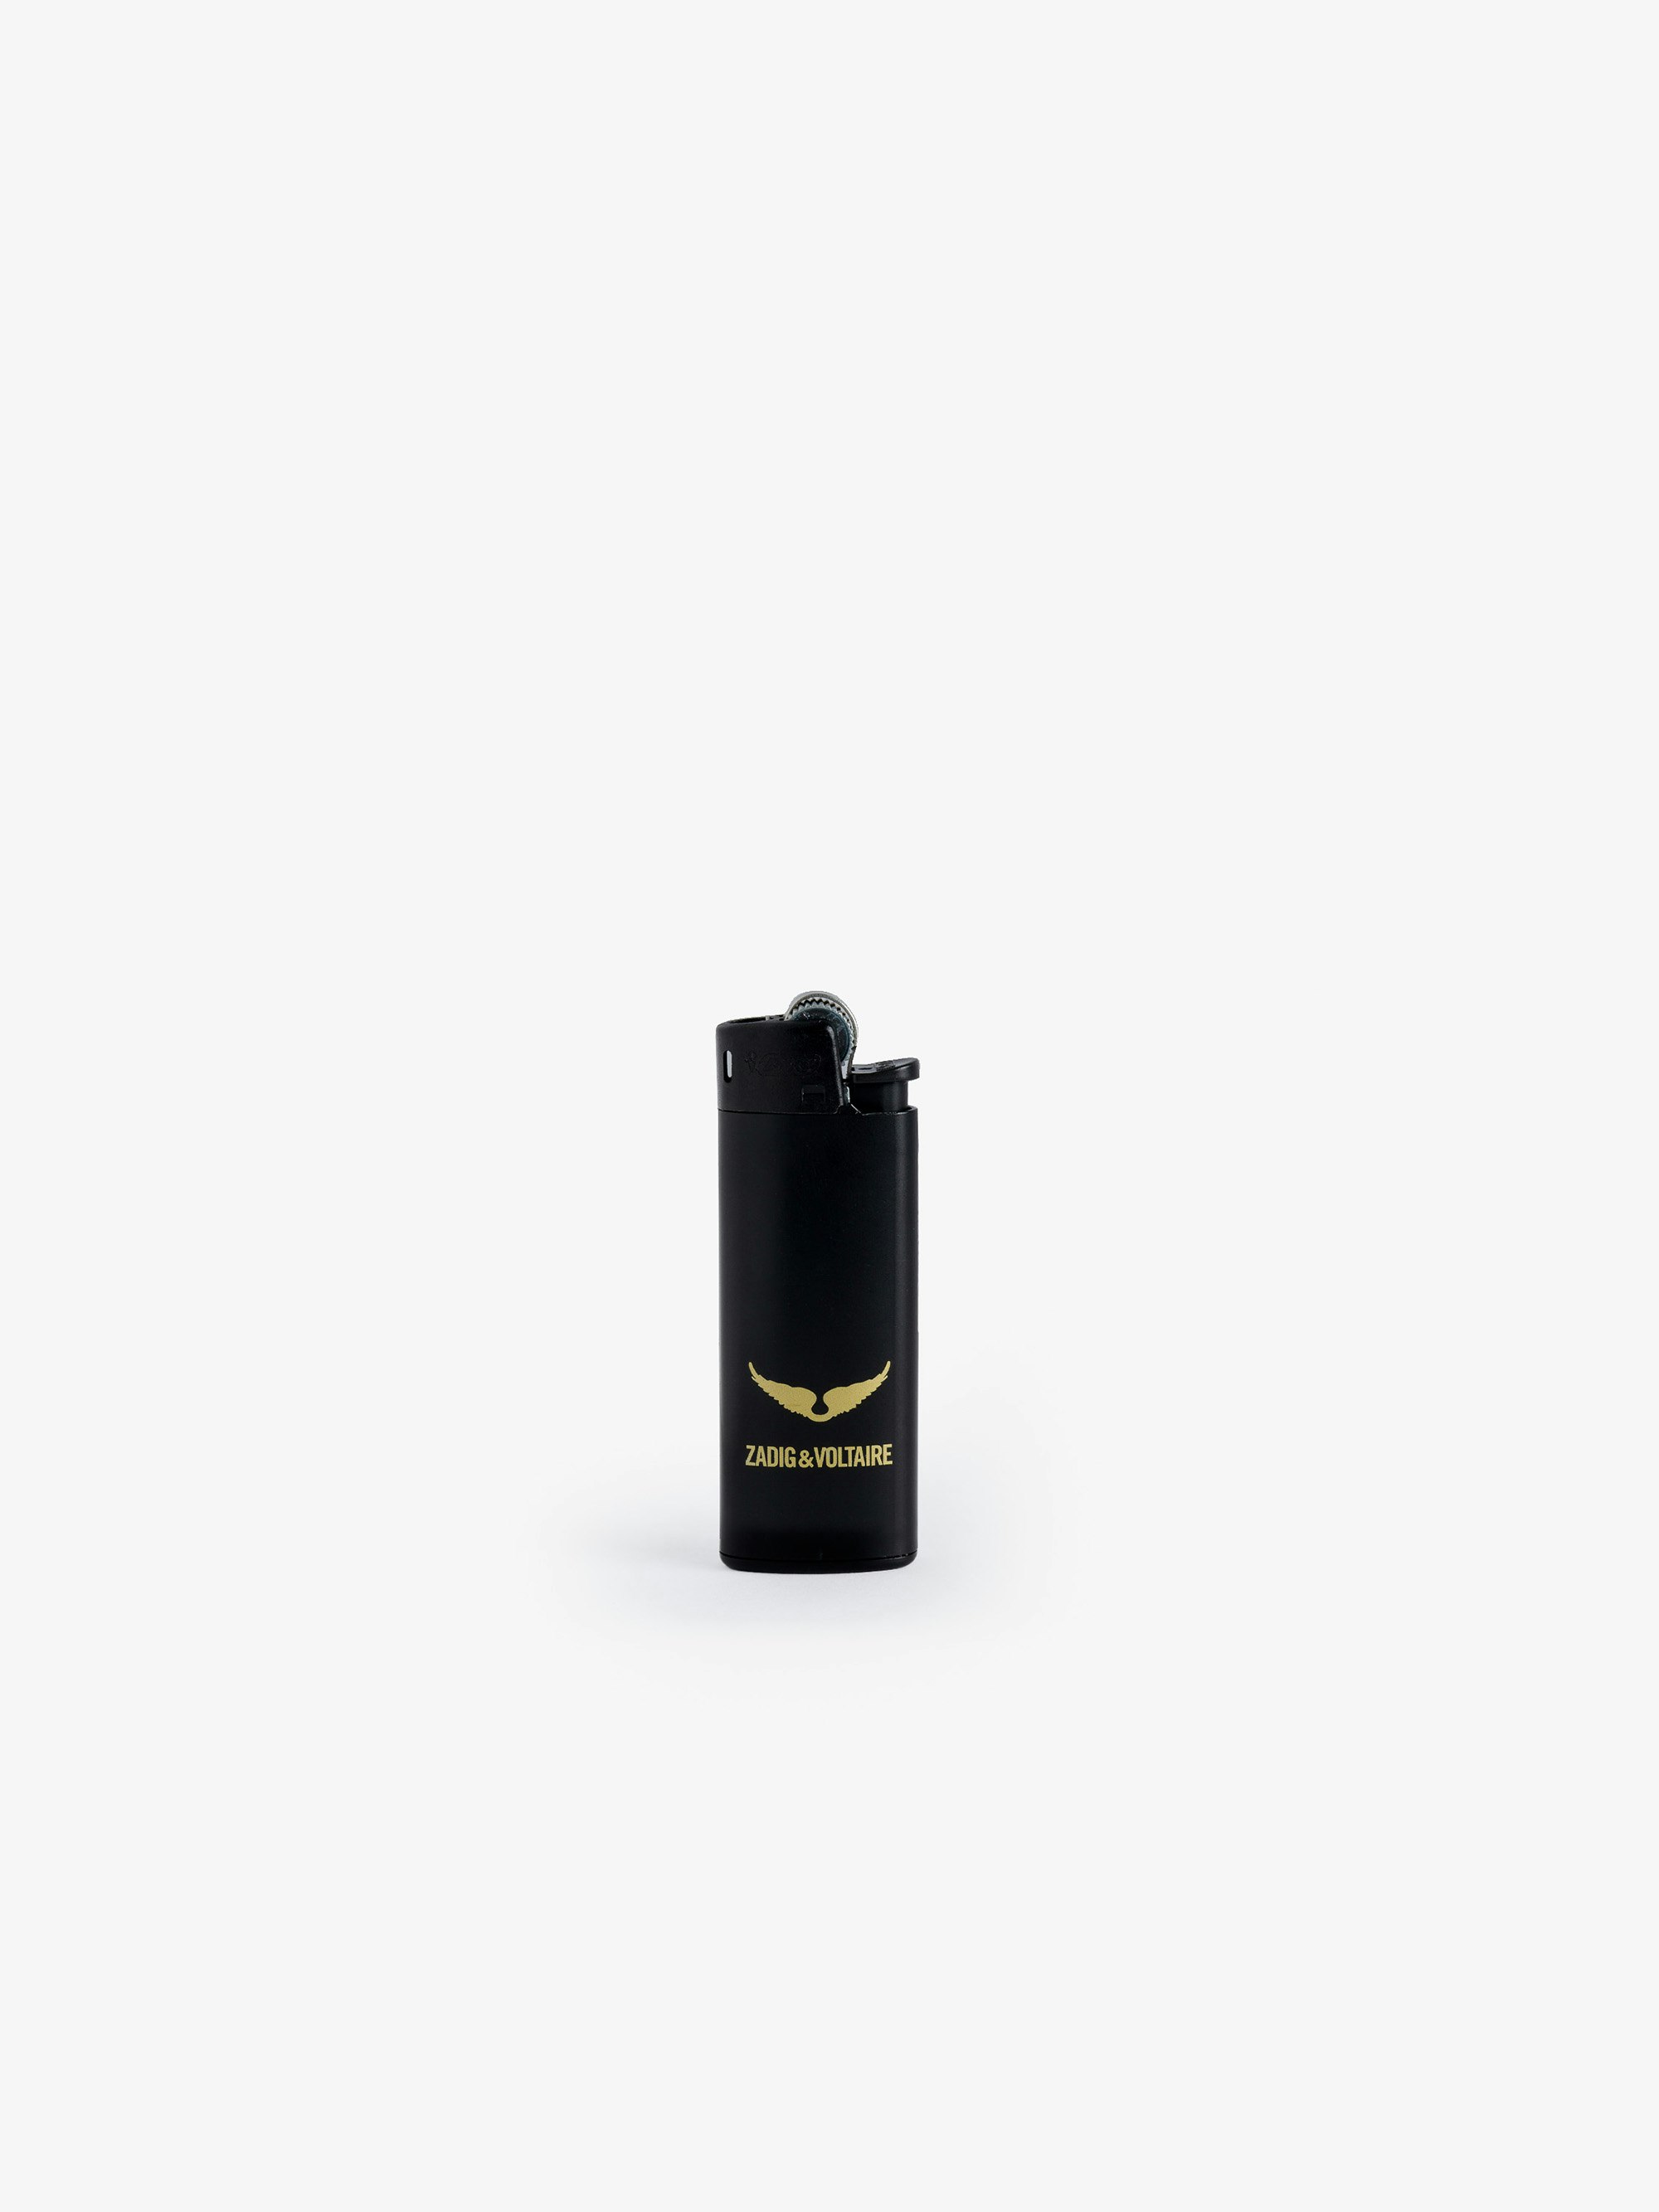 Flame of Love Lighter - Voltaire Vice black and contrasting gold-tone lighter decorated with wings motif and Zadig&Voltaire signature.

Available in Select Stores.